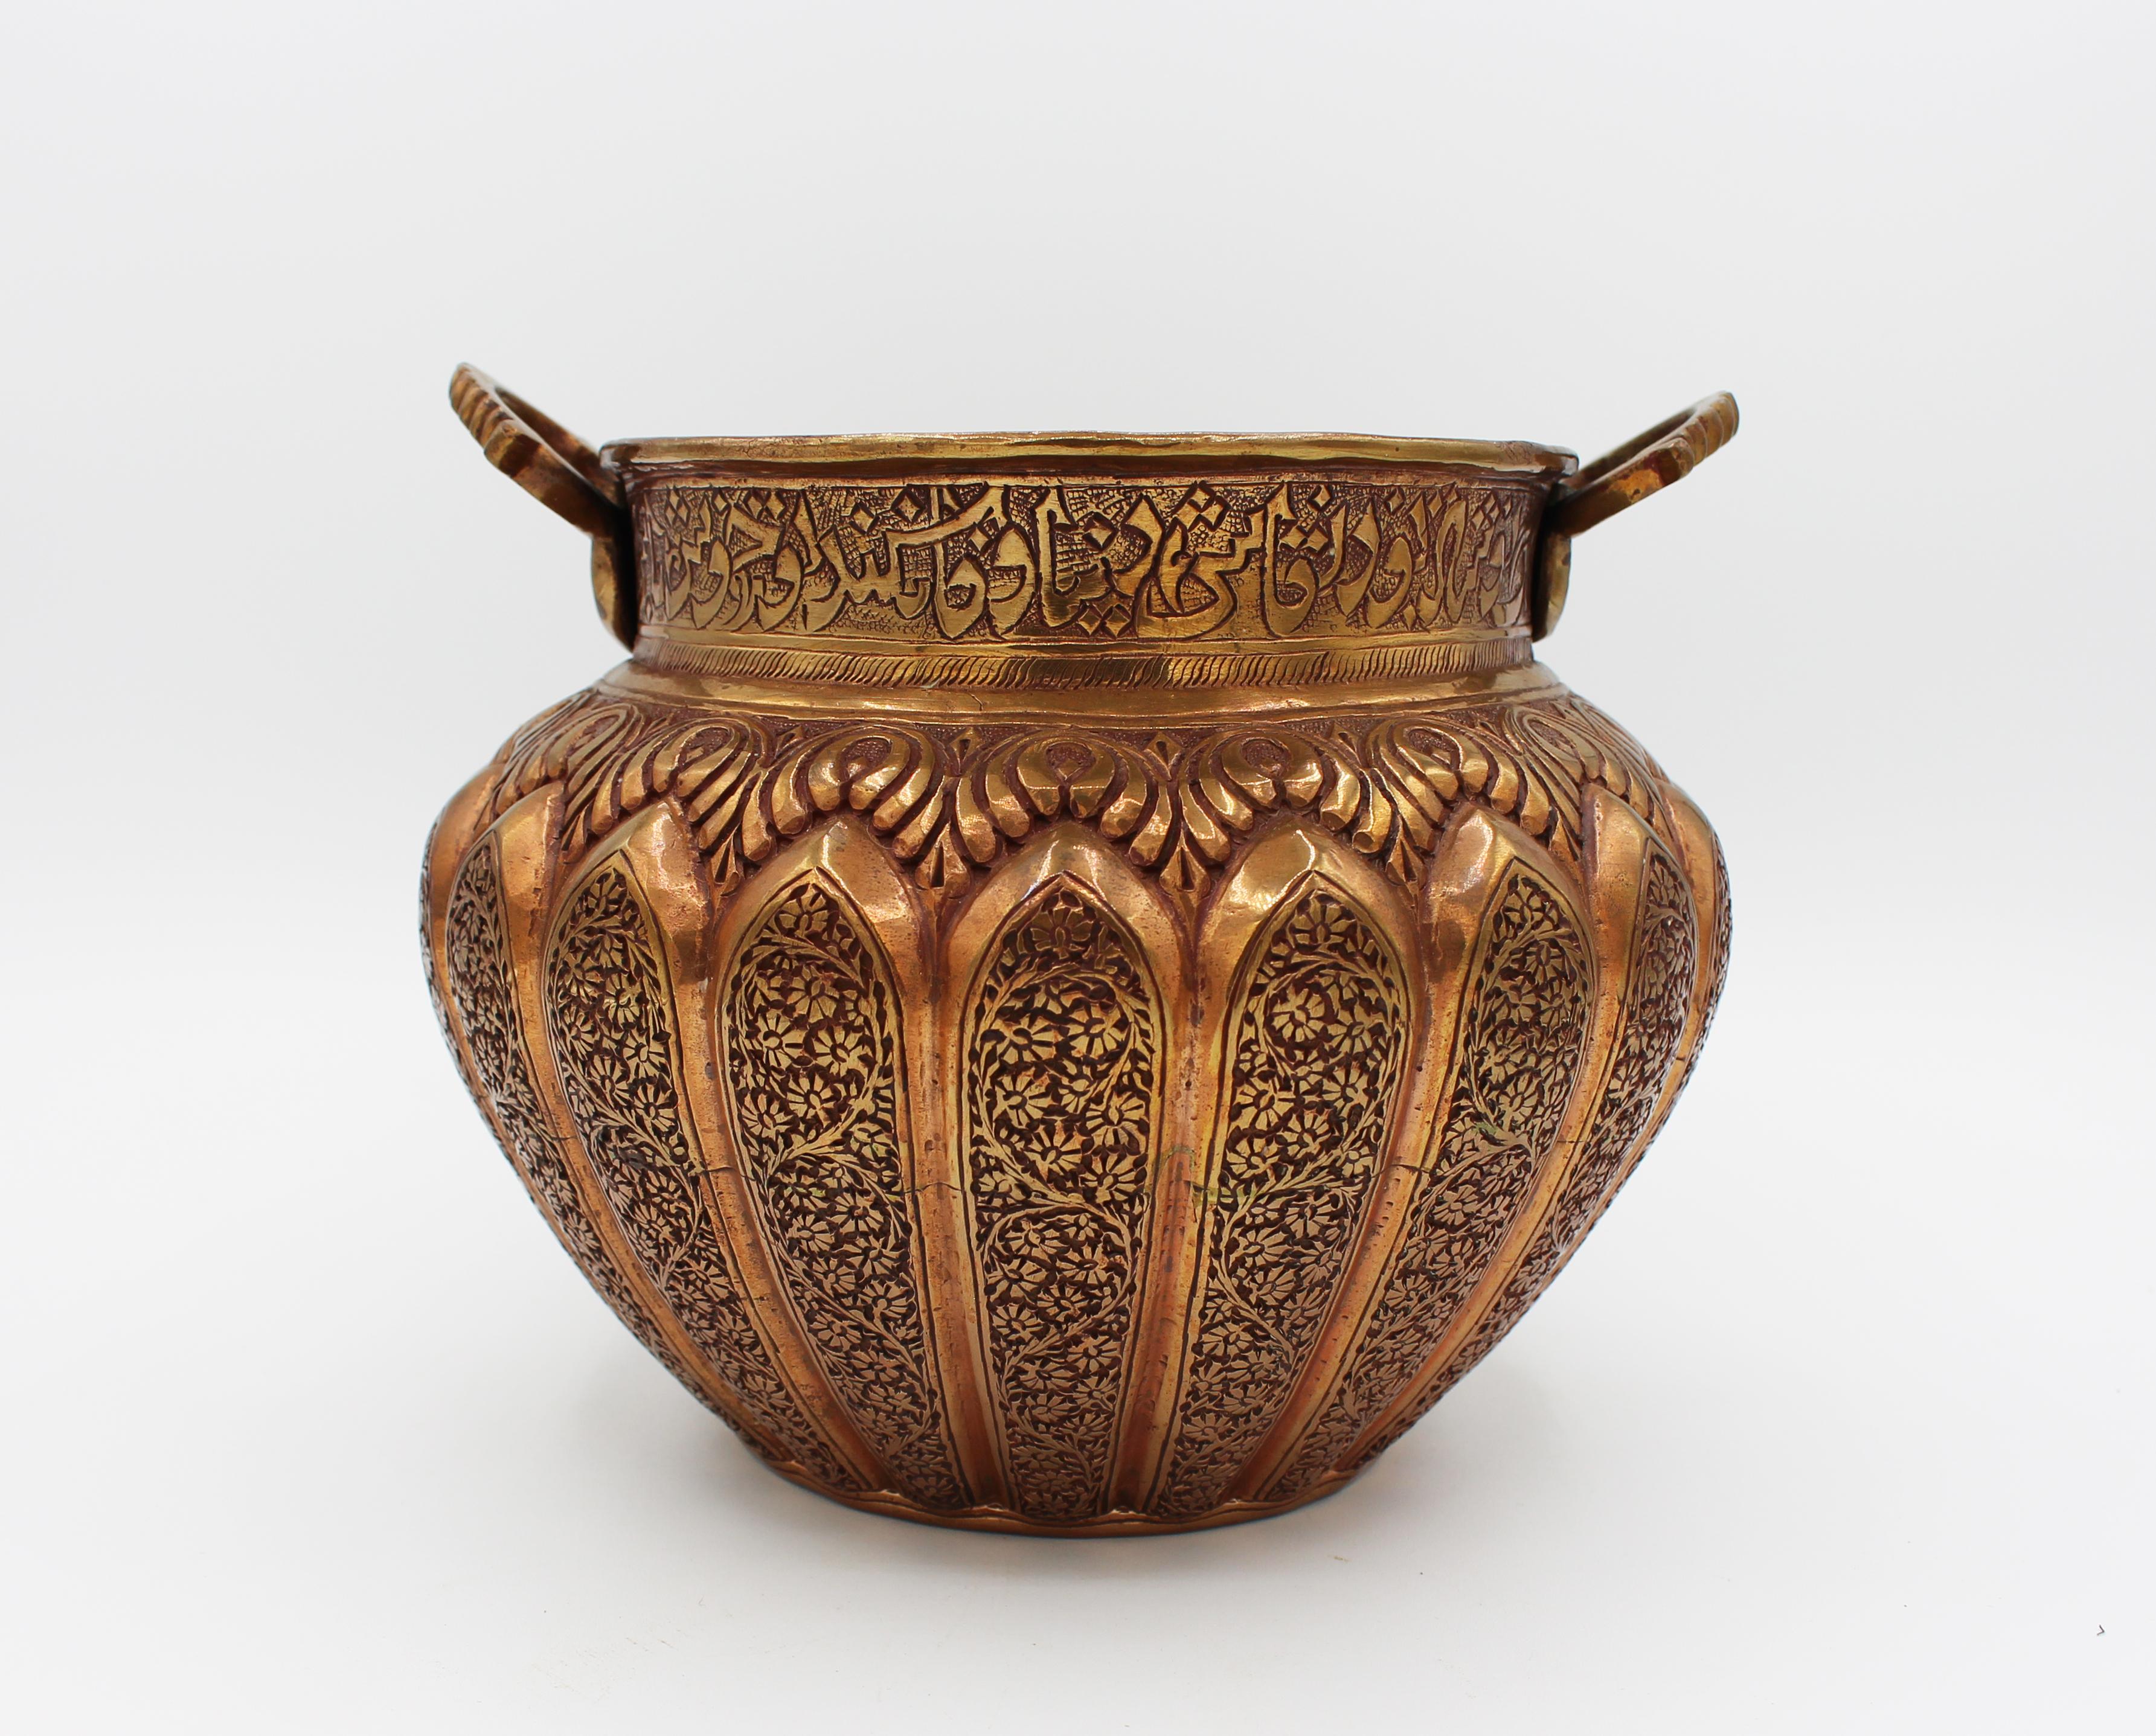 19th century Raj period Kashmiri copper lobed planter, each arch set with brass floral grills of flowering vines. Inscribed neck. Artisan signed. 7 1/2